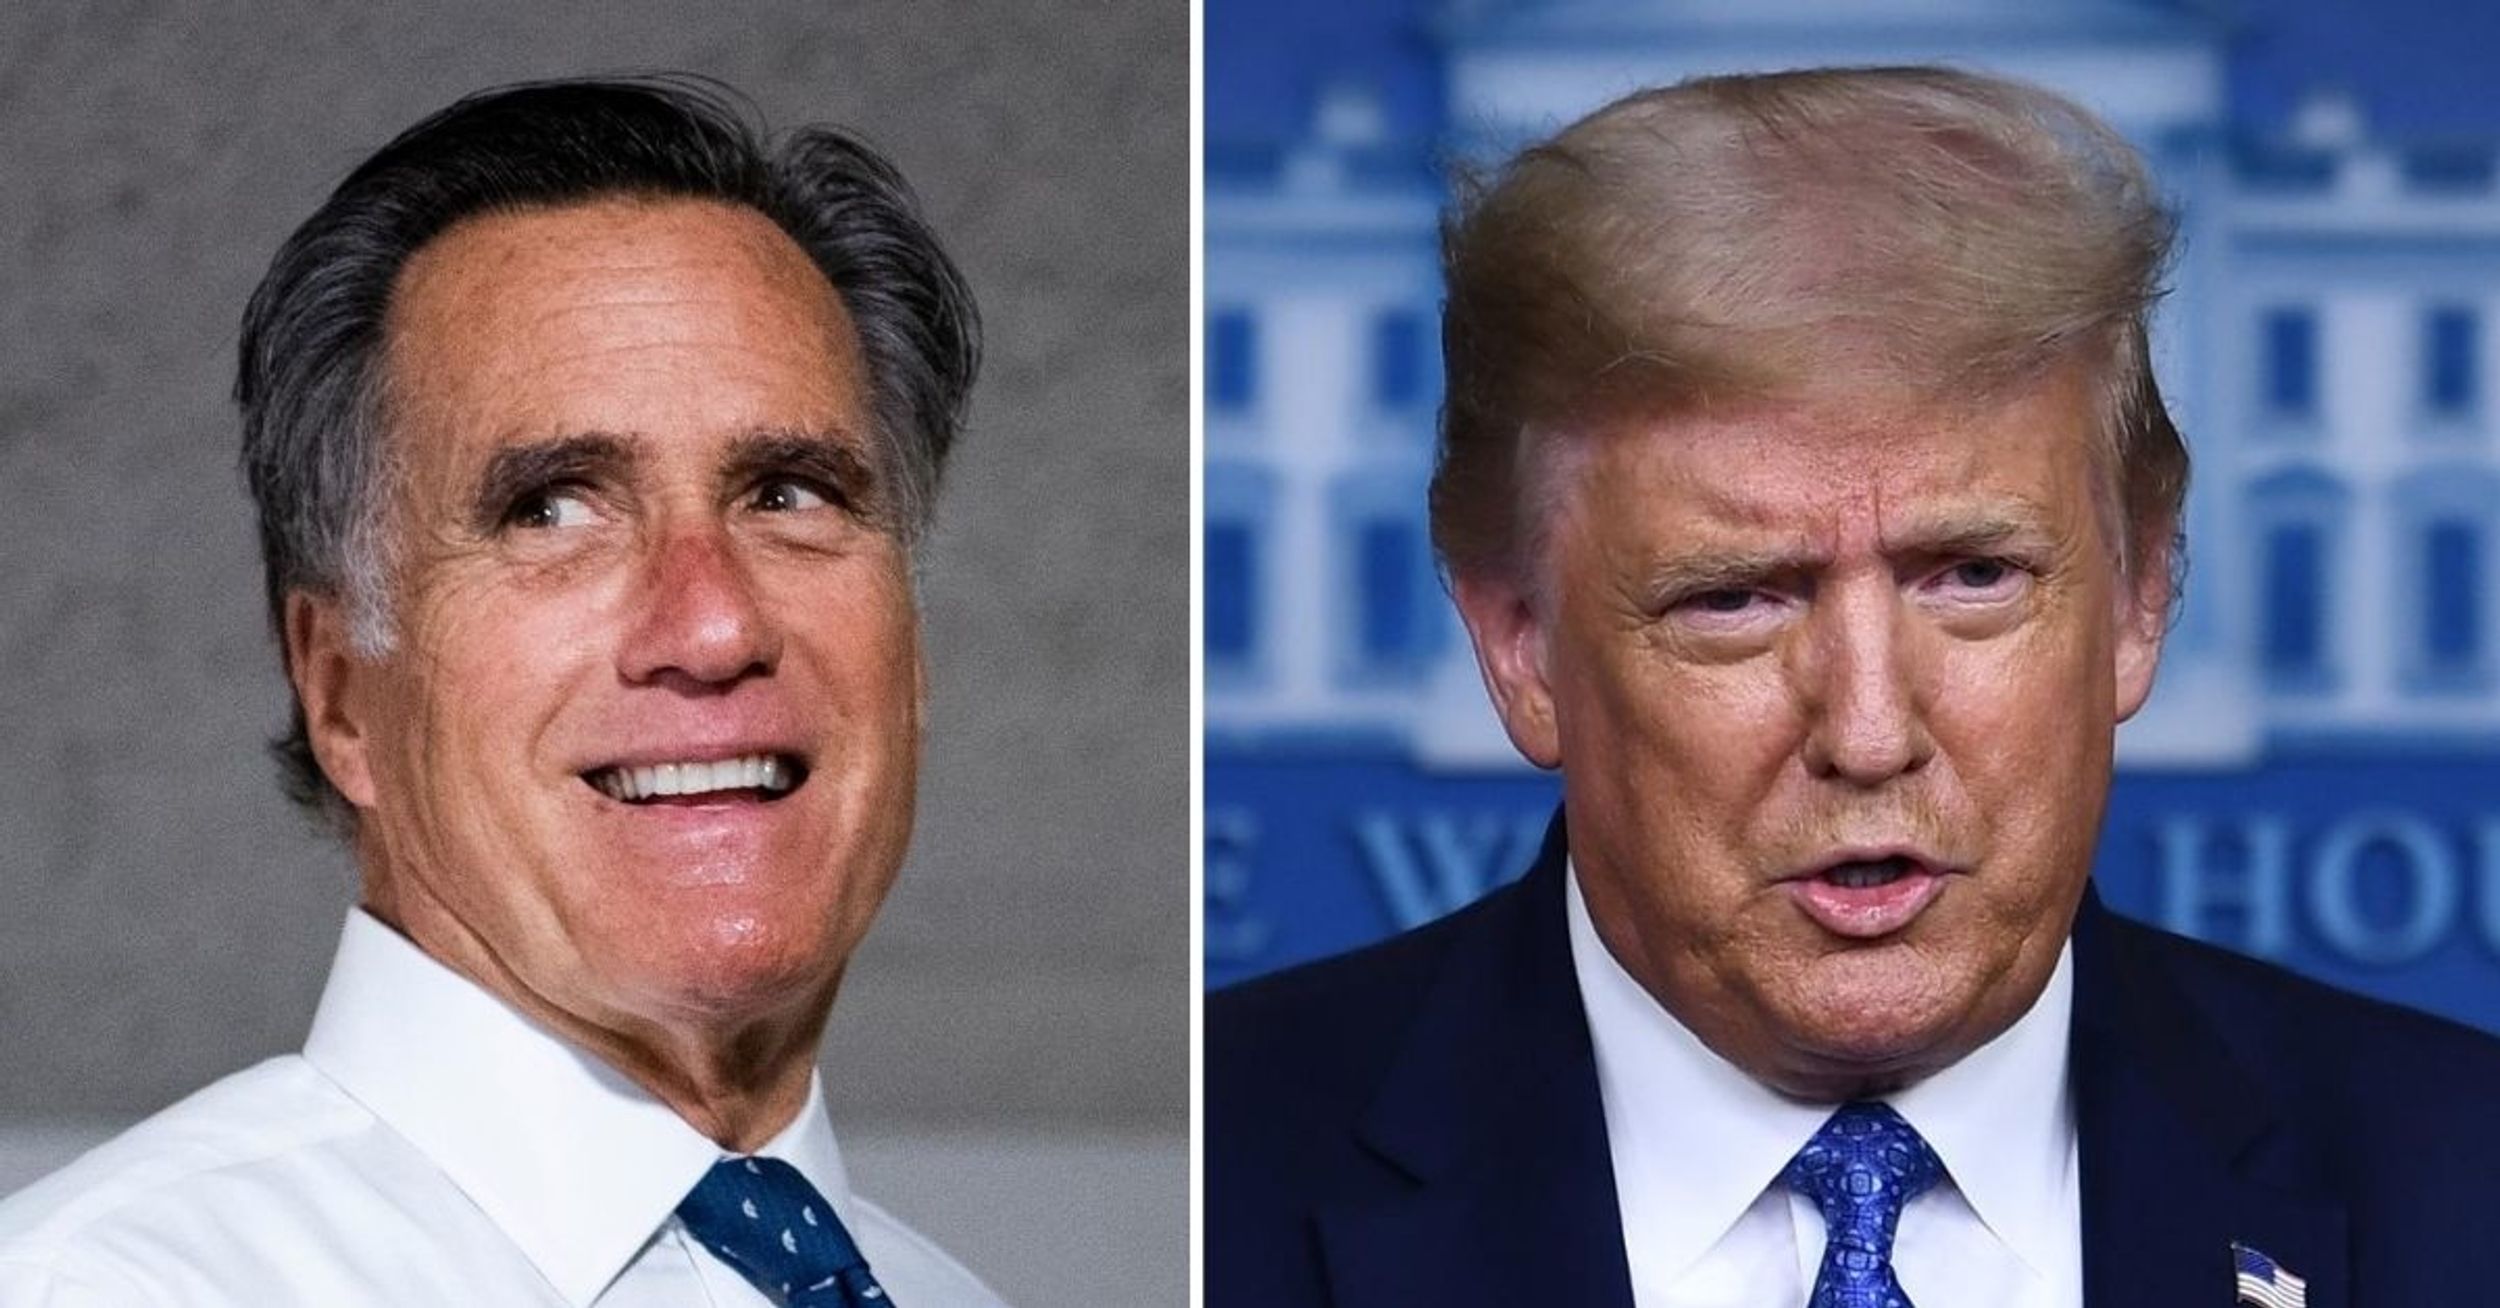 Mitt Romney Explains Why He Believes Trump Will Win Reelection—And We'd Better Hope He's Wrong